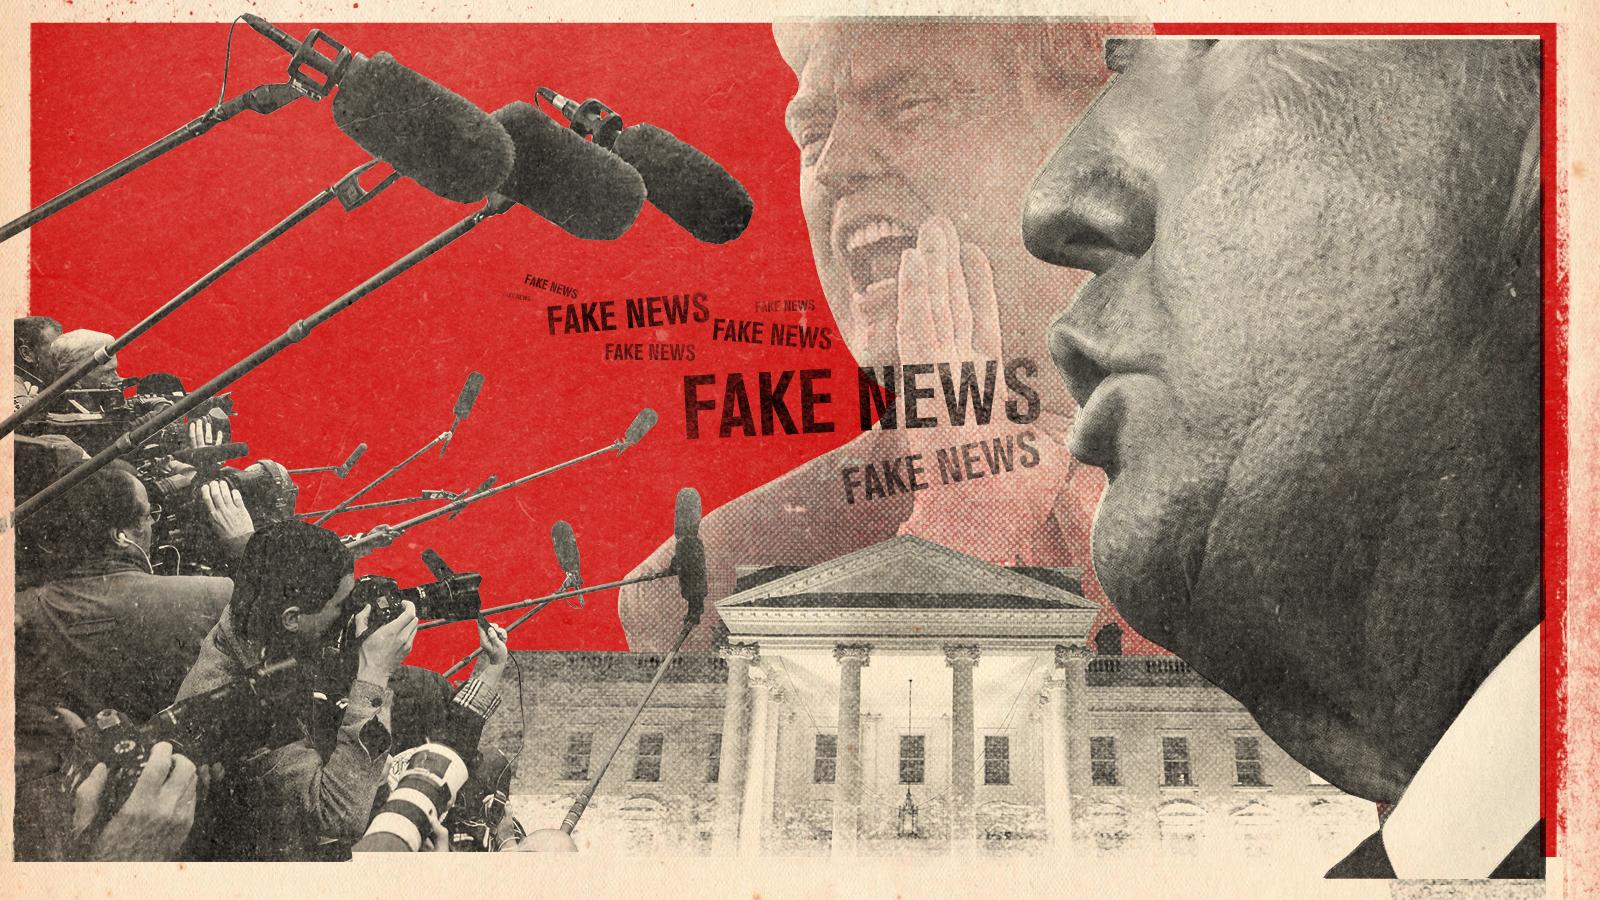 No matter who wins the US election, the world's 'fake news' problem is